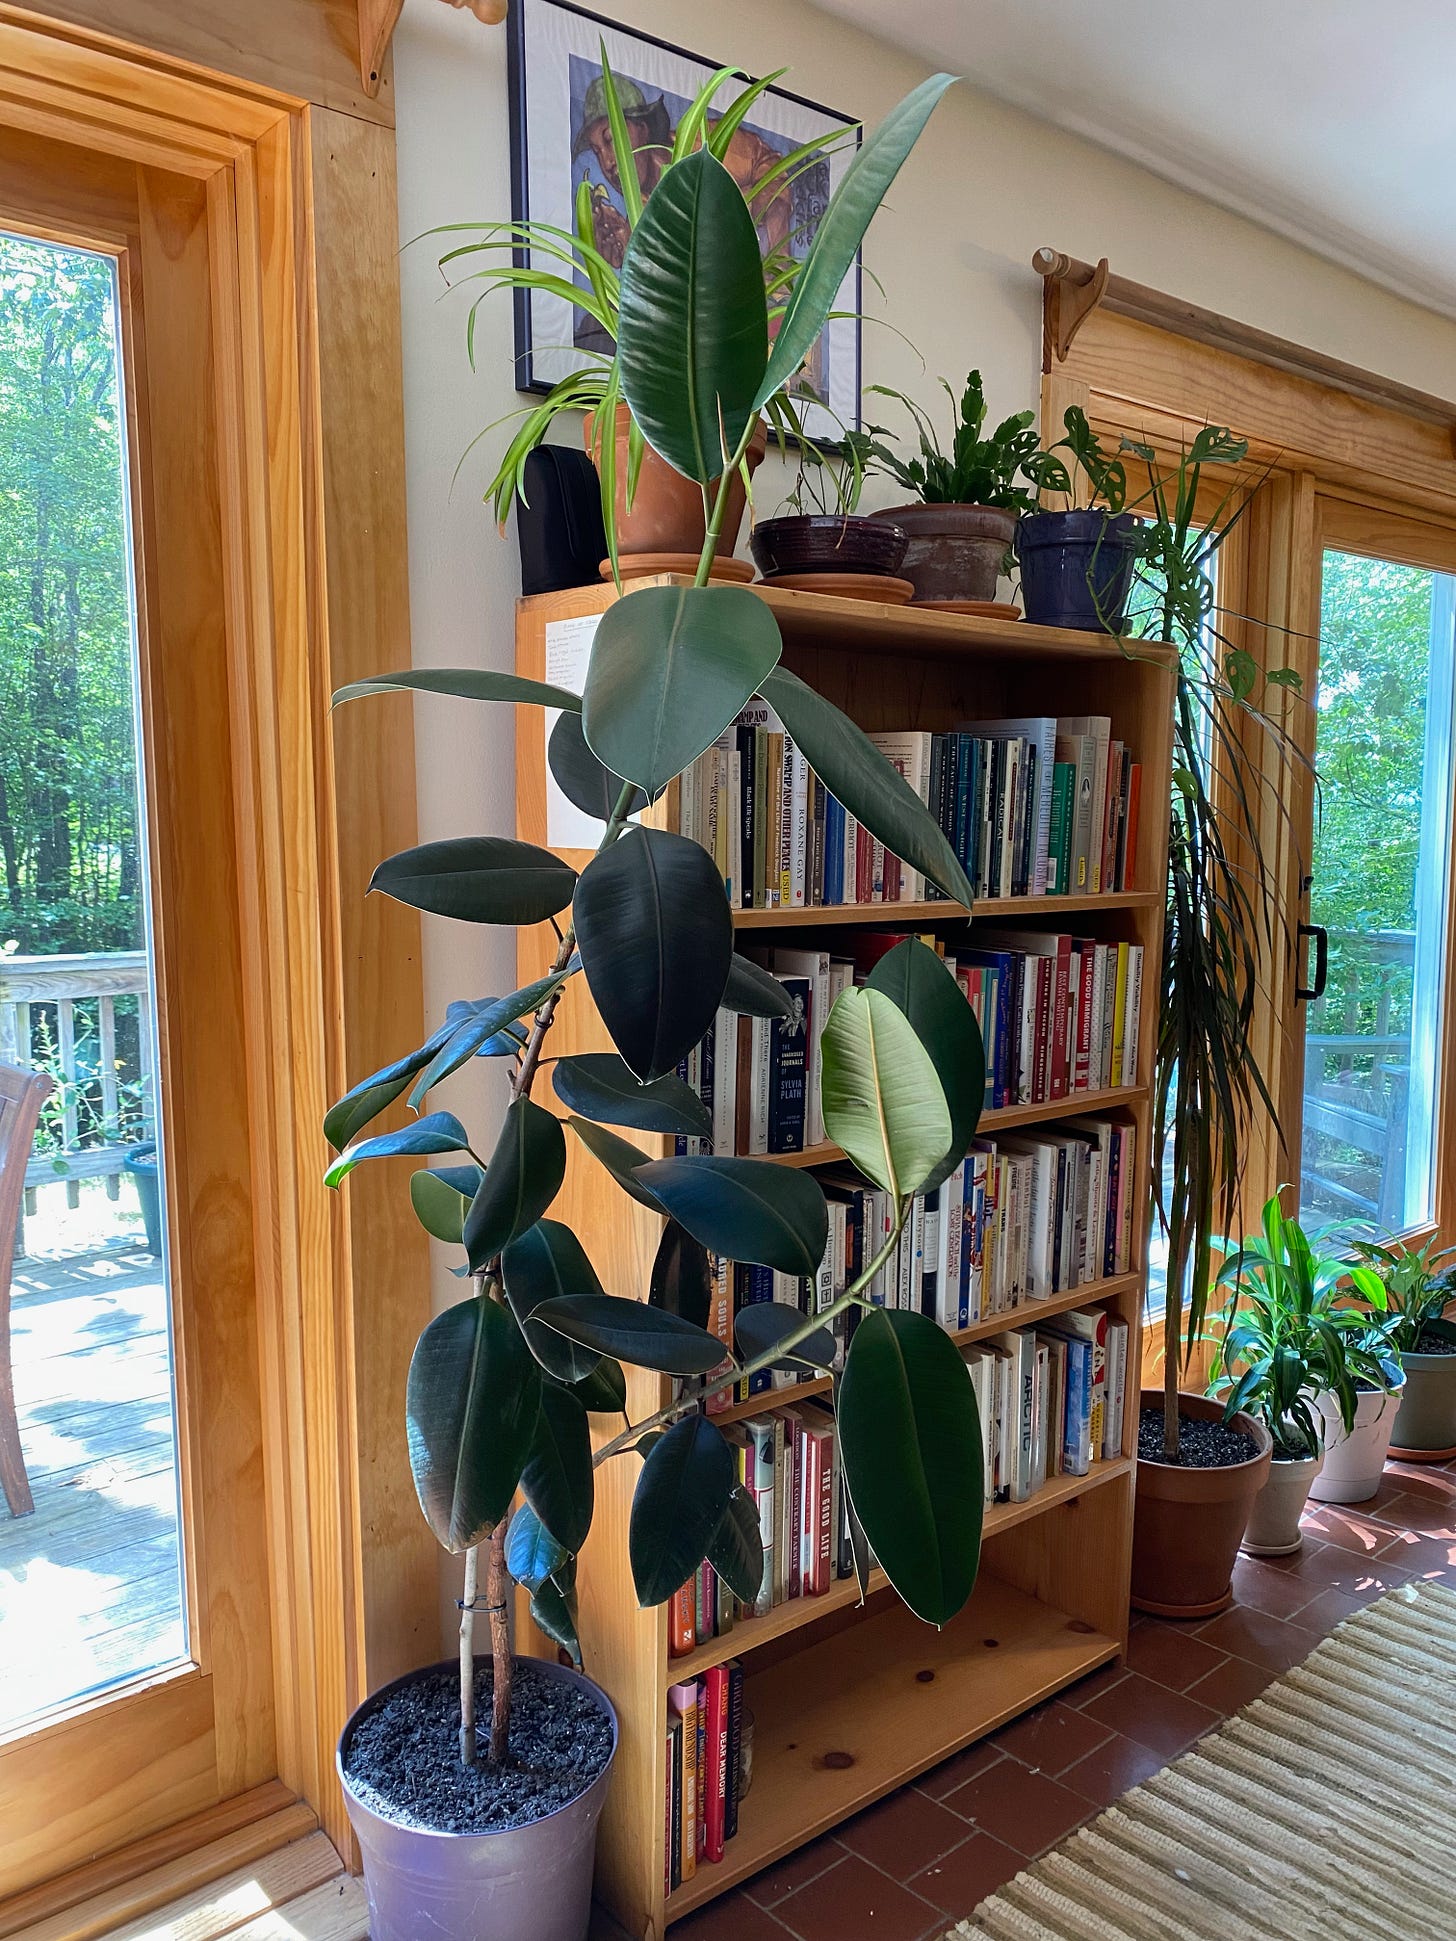 An extremely tall rubber tree in a sunny room in front of a bookshelf.